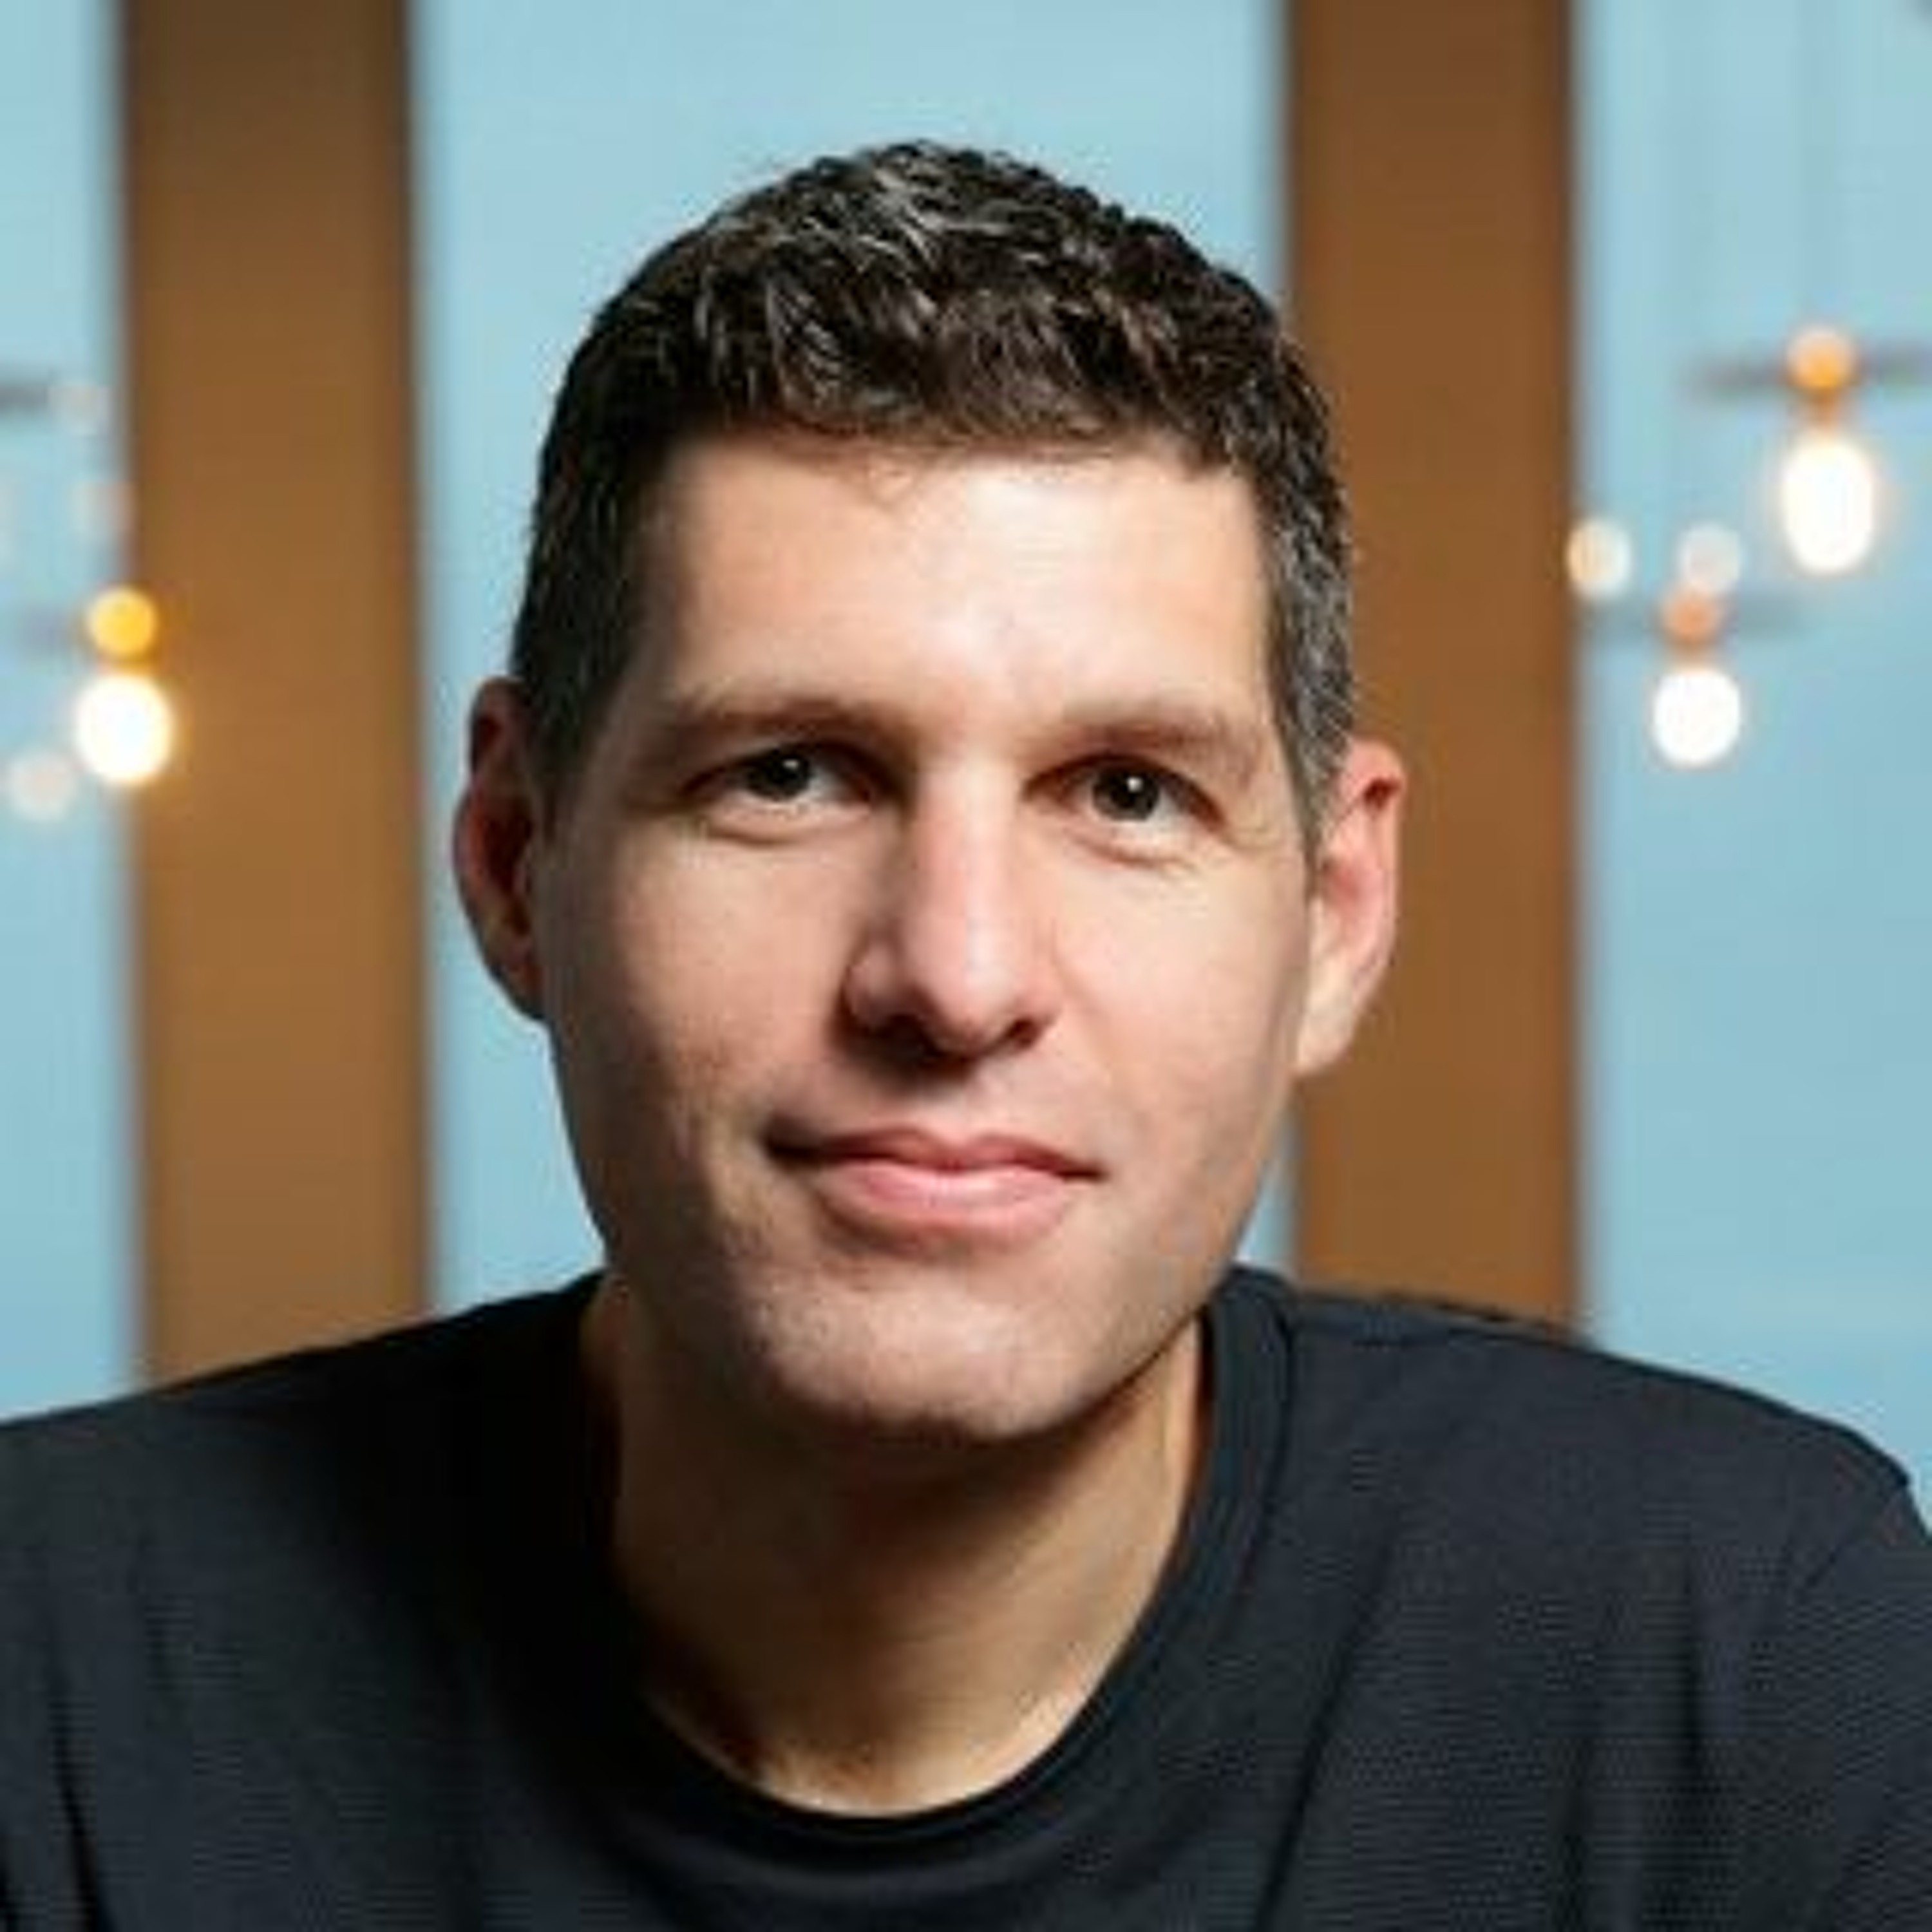 Robust Intelligence CEO Yaron Singer on How to Prevent AI Failures - Ep. 165